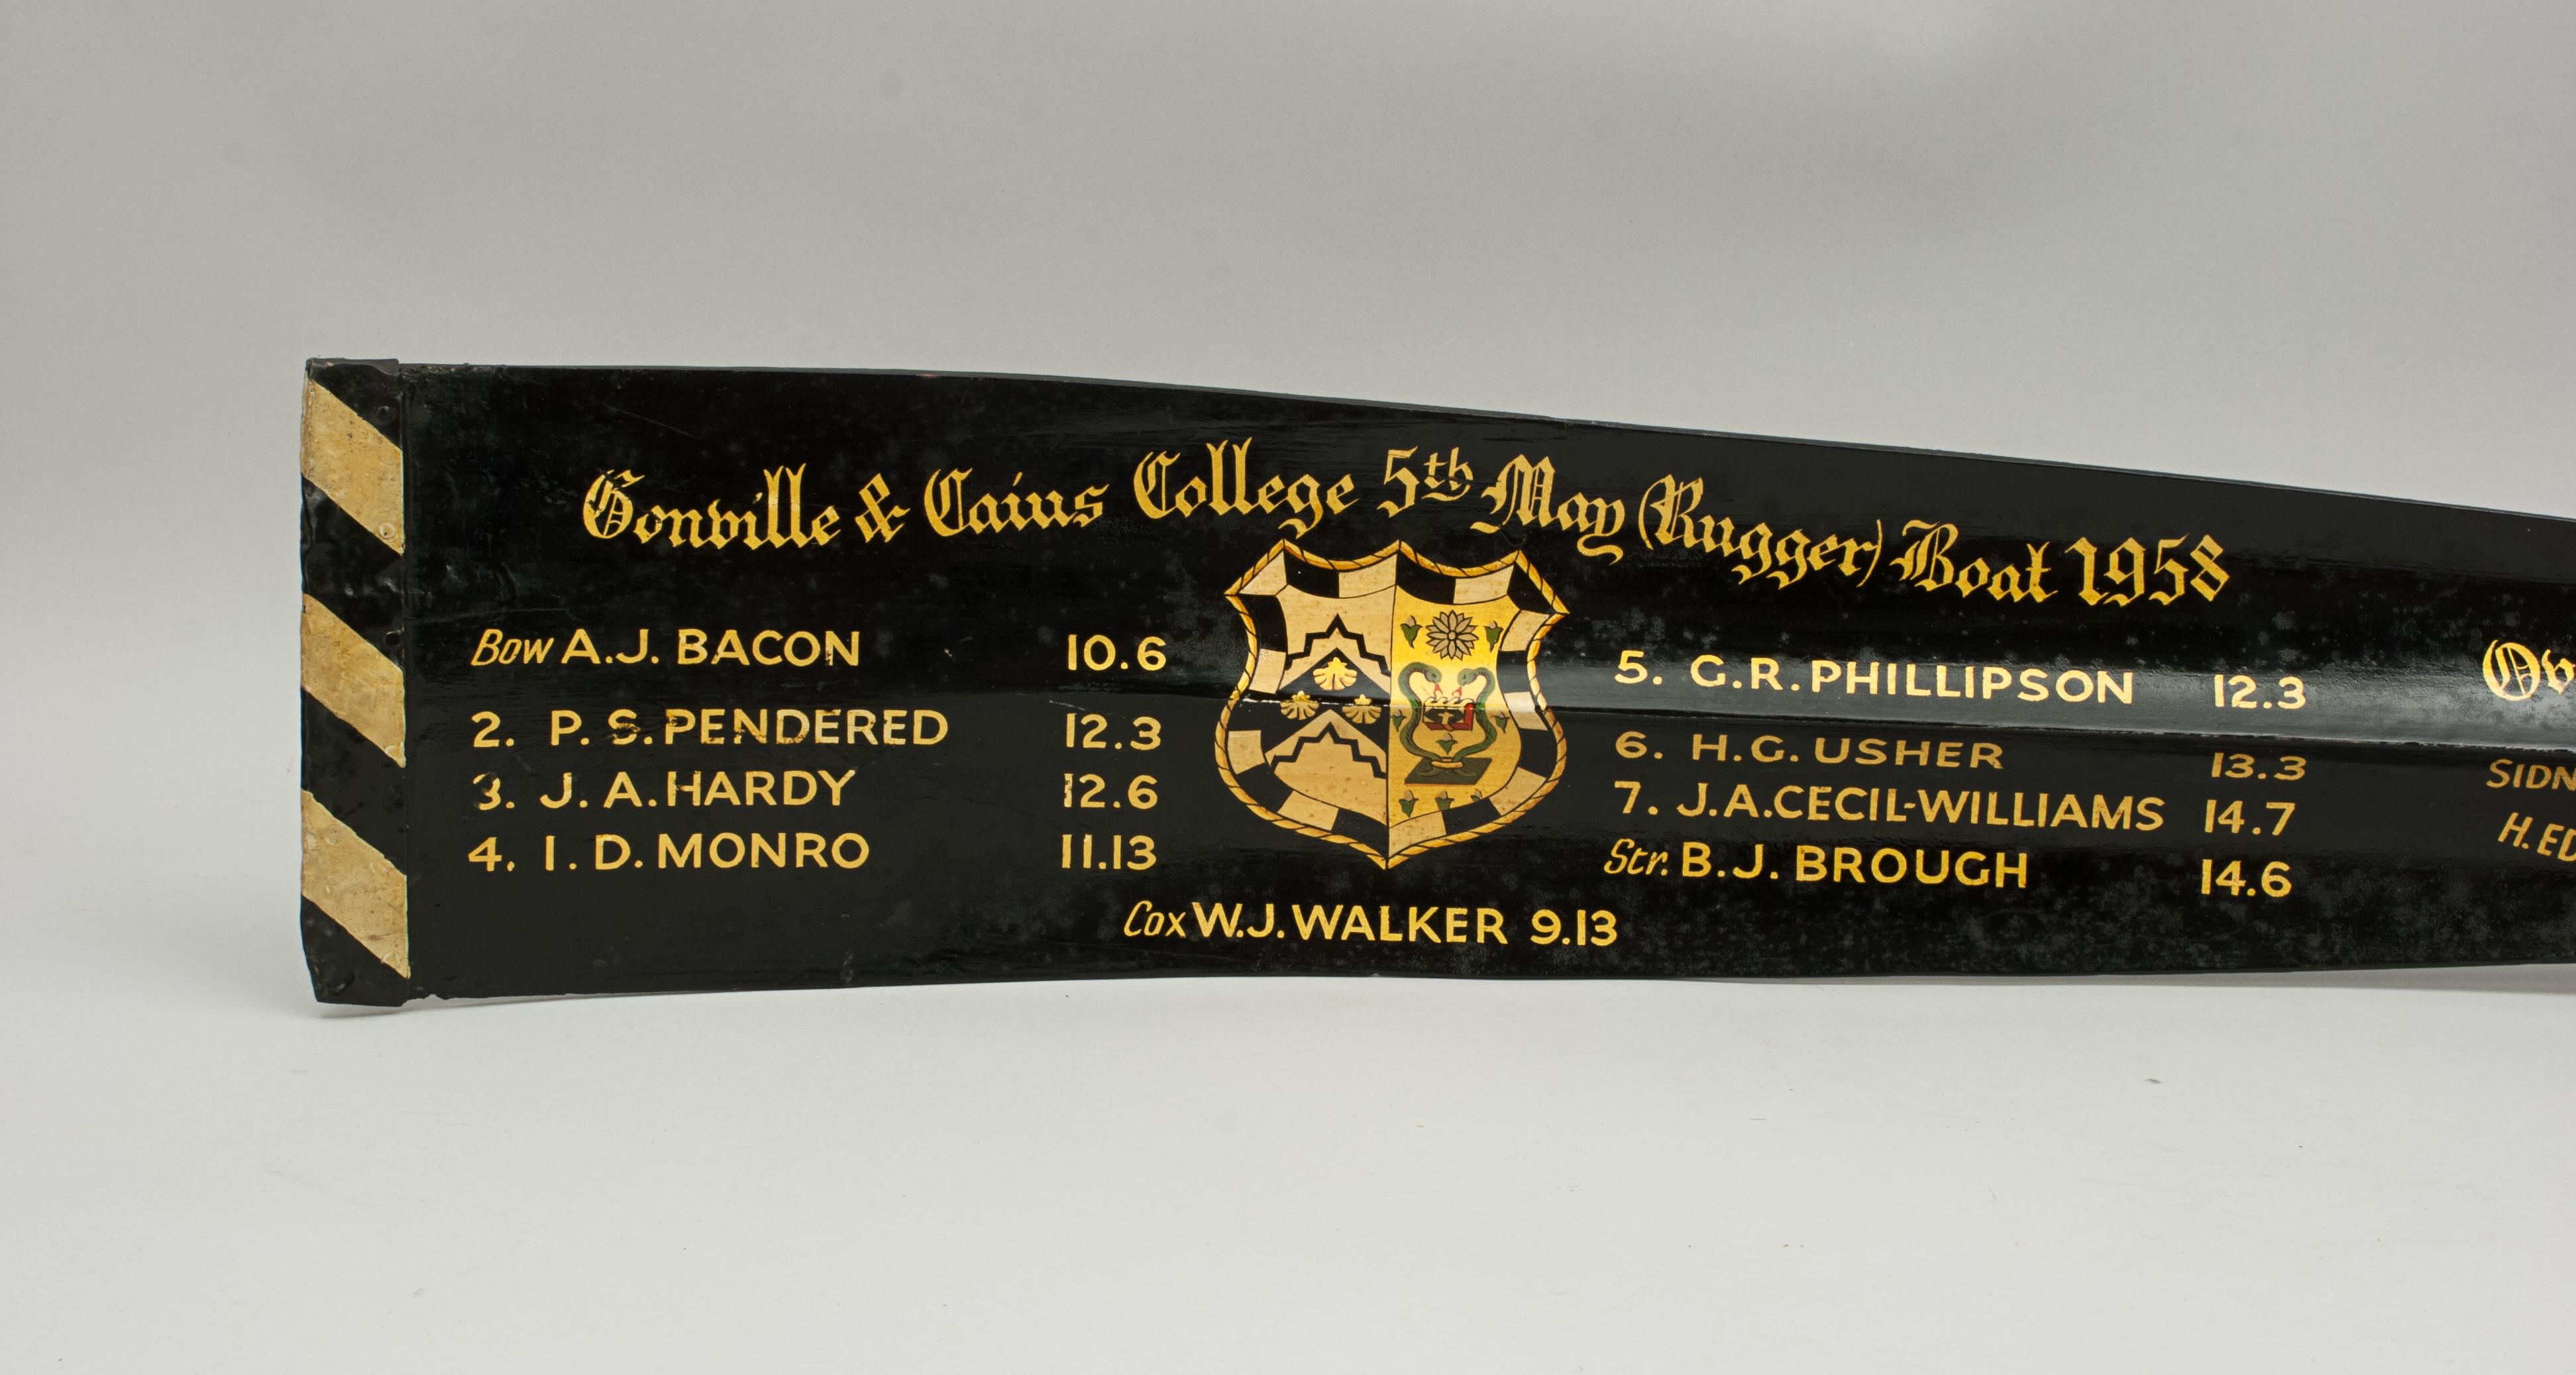 Sporting Art Full Length Rowing Oar, Cambridge University, Gonville & Caius College, 1958